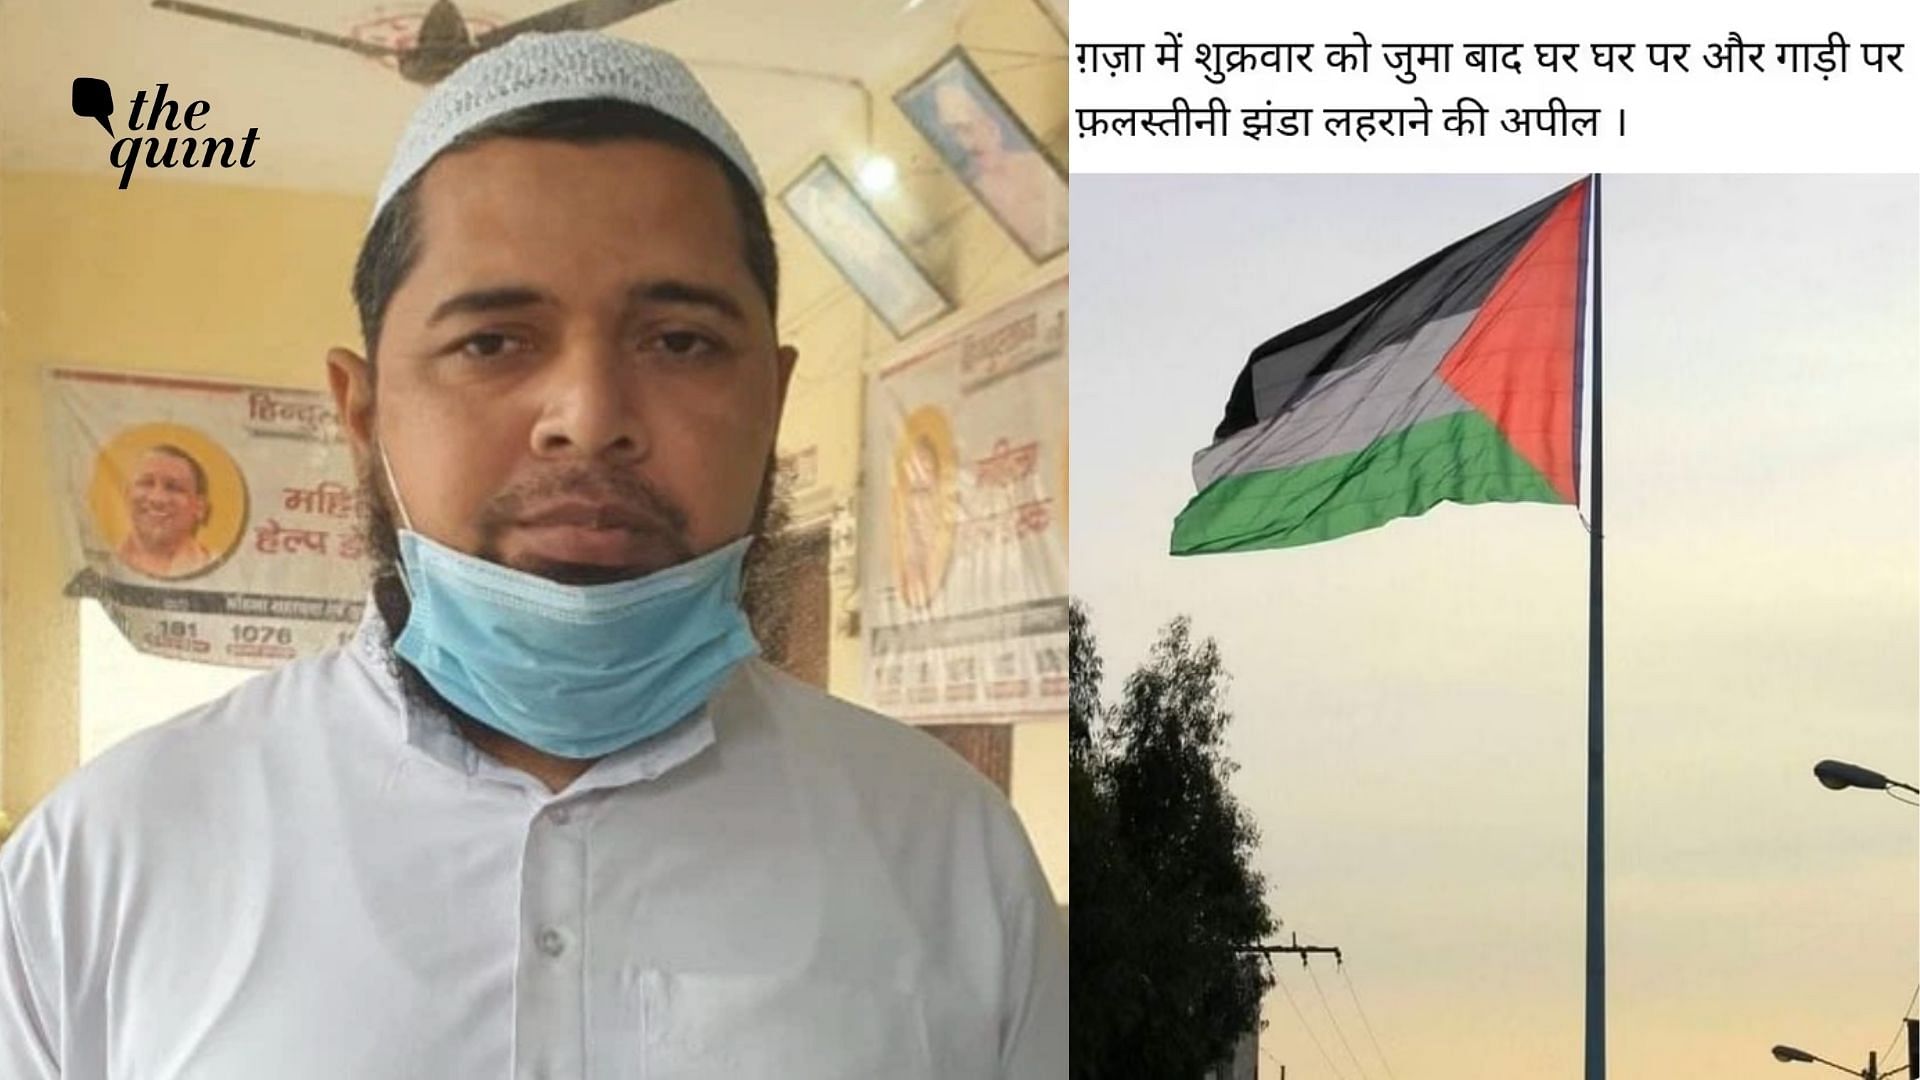 The Uttar Pradesh Police has arrested a person from Azamgarh district for a Facebook post appealing for hosting flags on houses to show solidarity with Palestine.